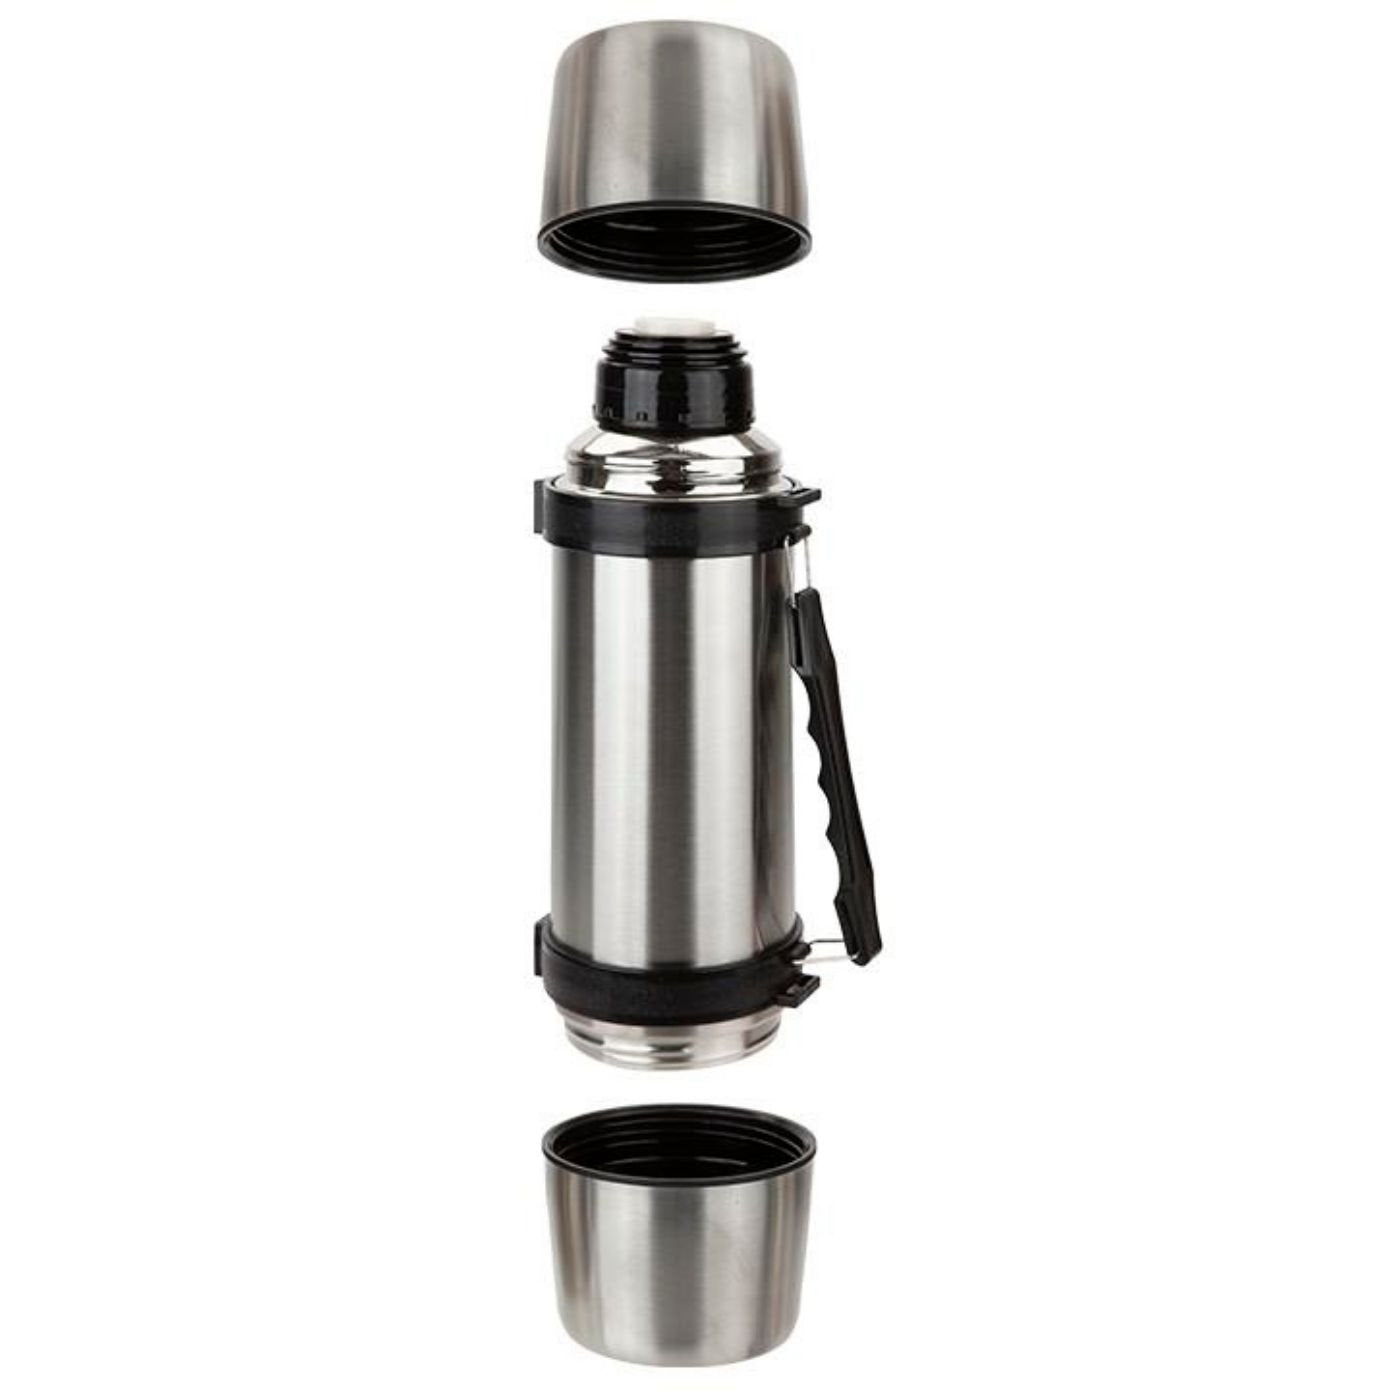 Summit Duo Cup Thermosfles - Stainless steel Thermosfles - Reisartikelen-nl